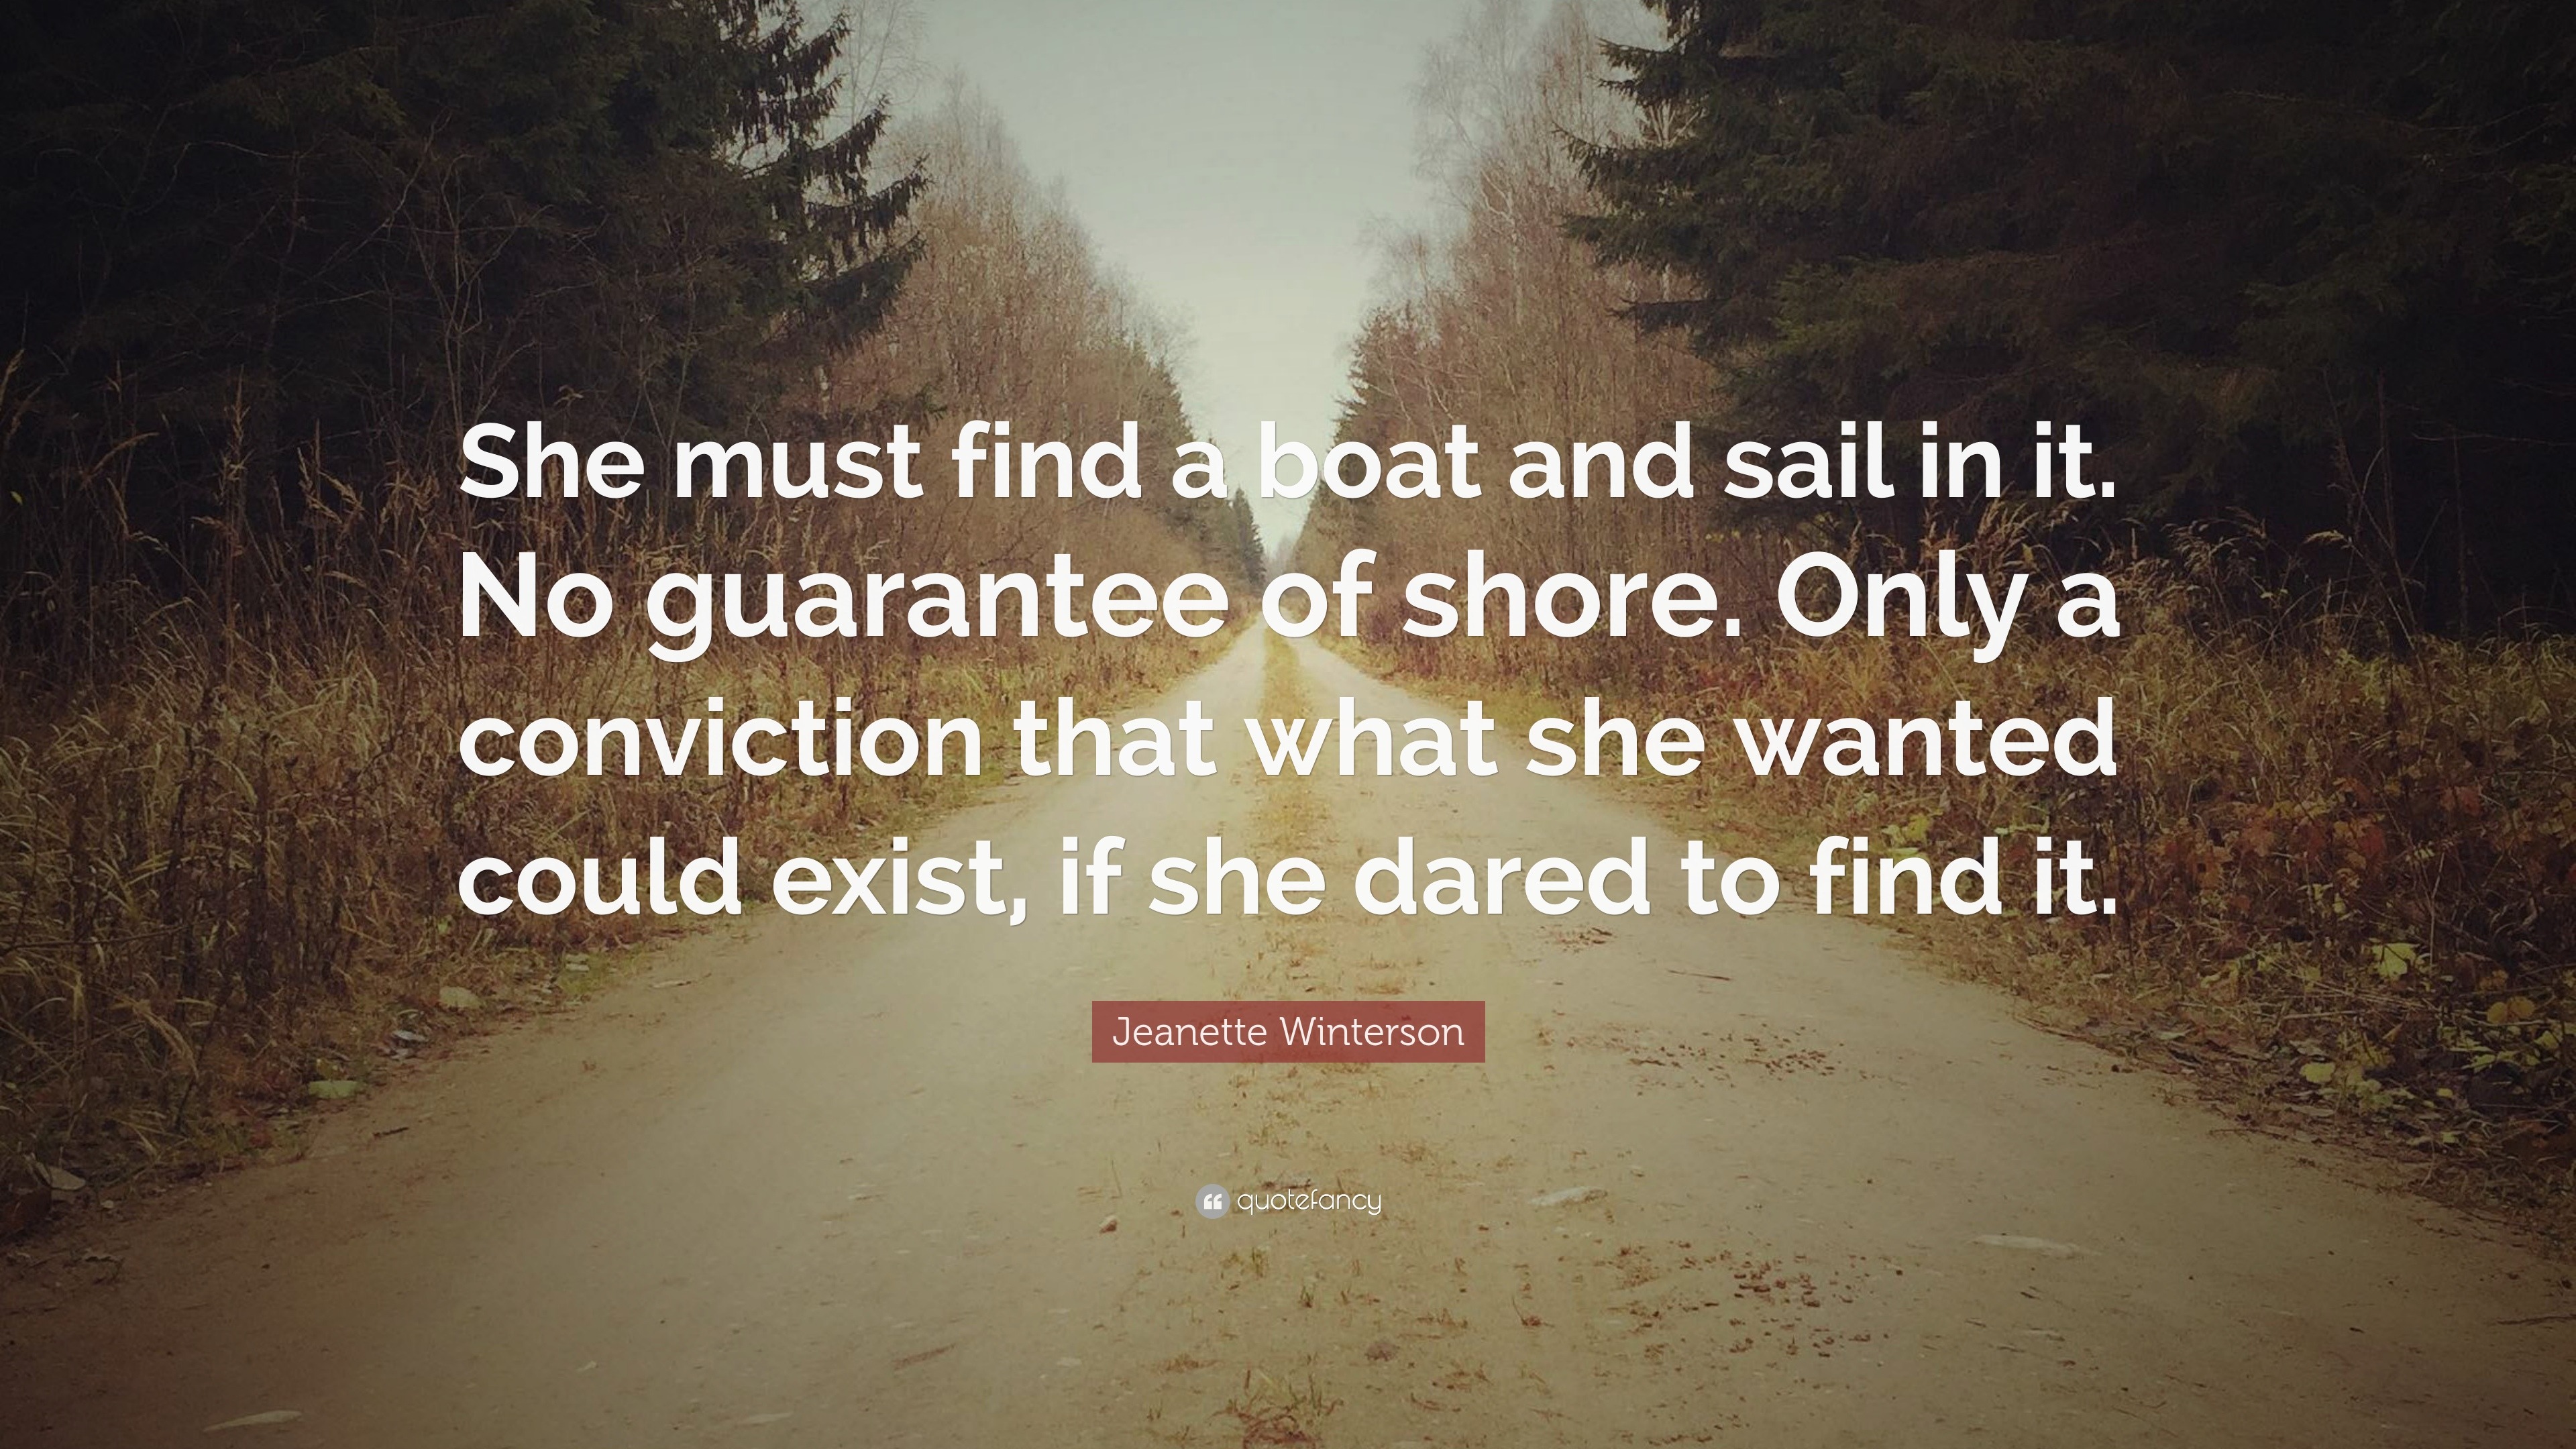 Jeanette Winterson Quote: “She must find a boat and sail in it. No ...